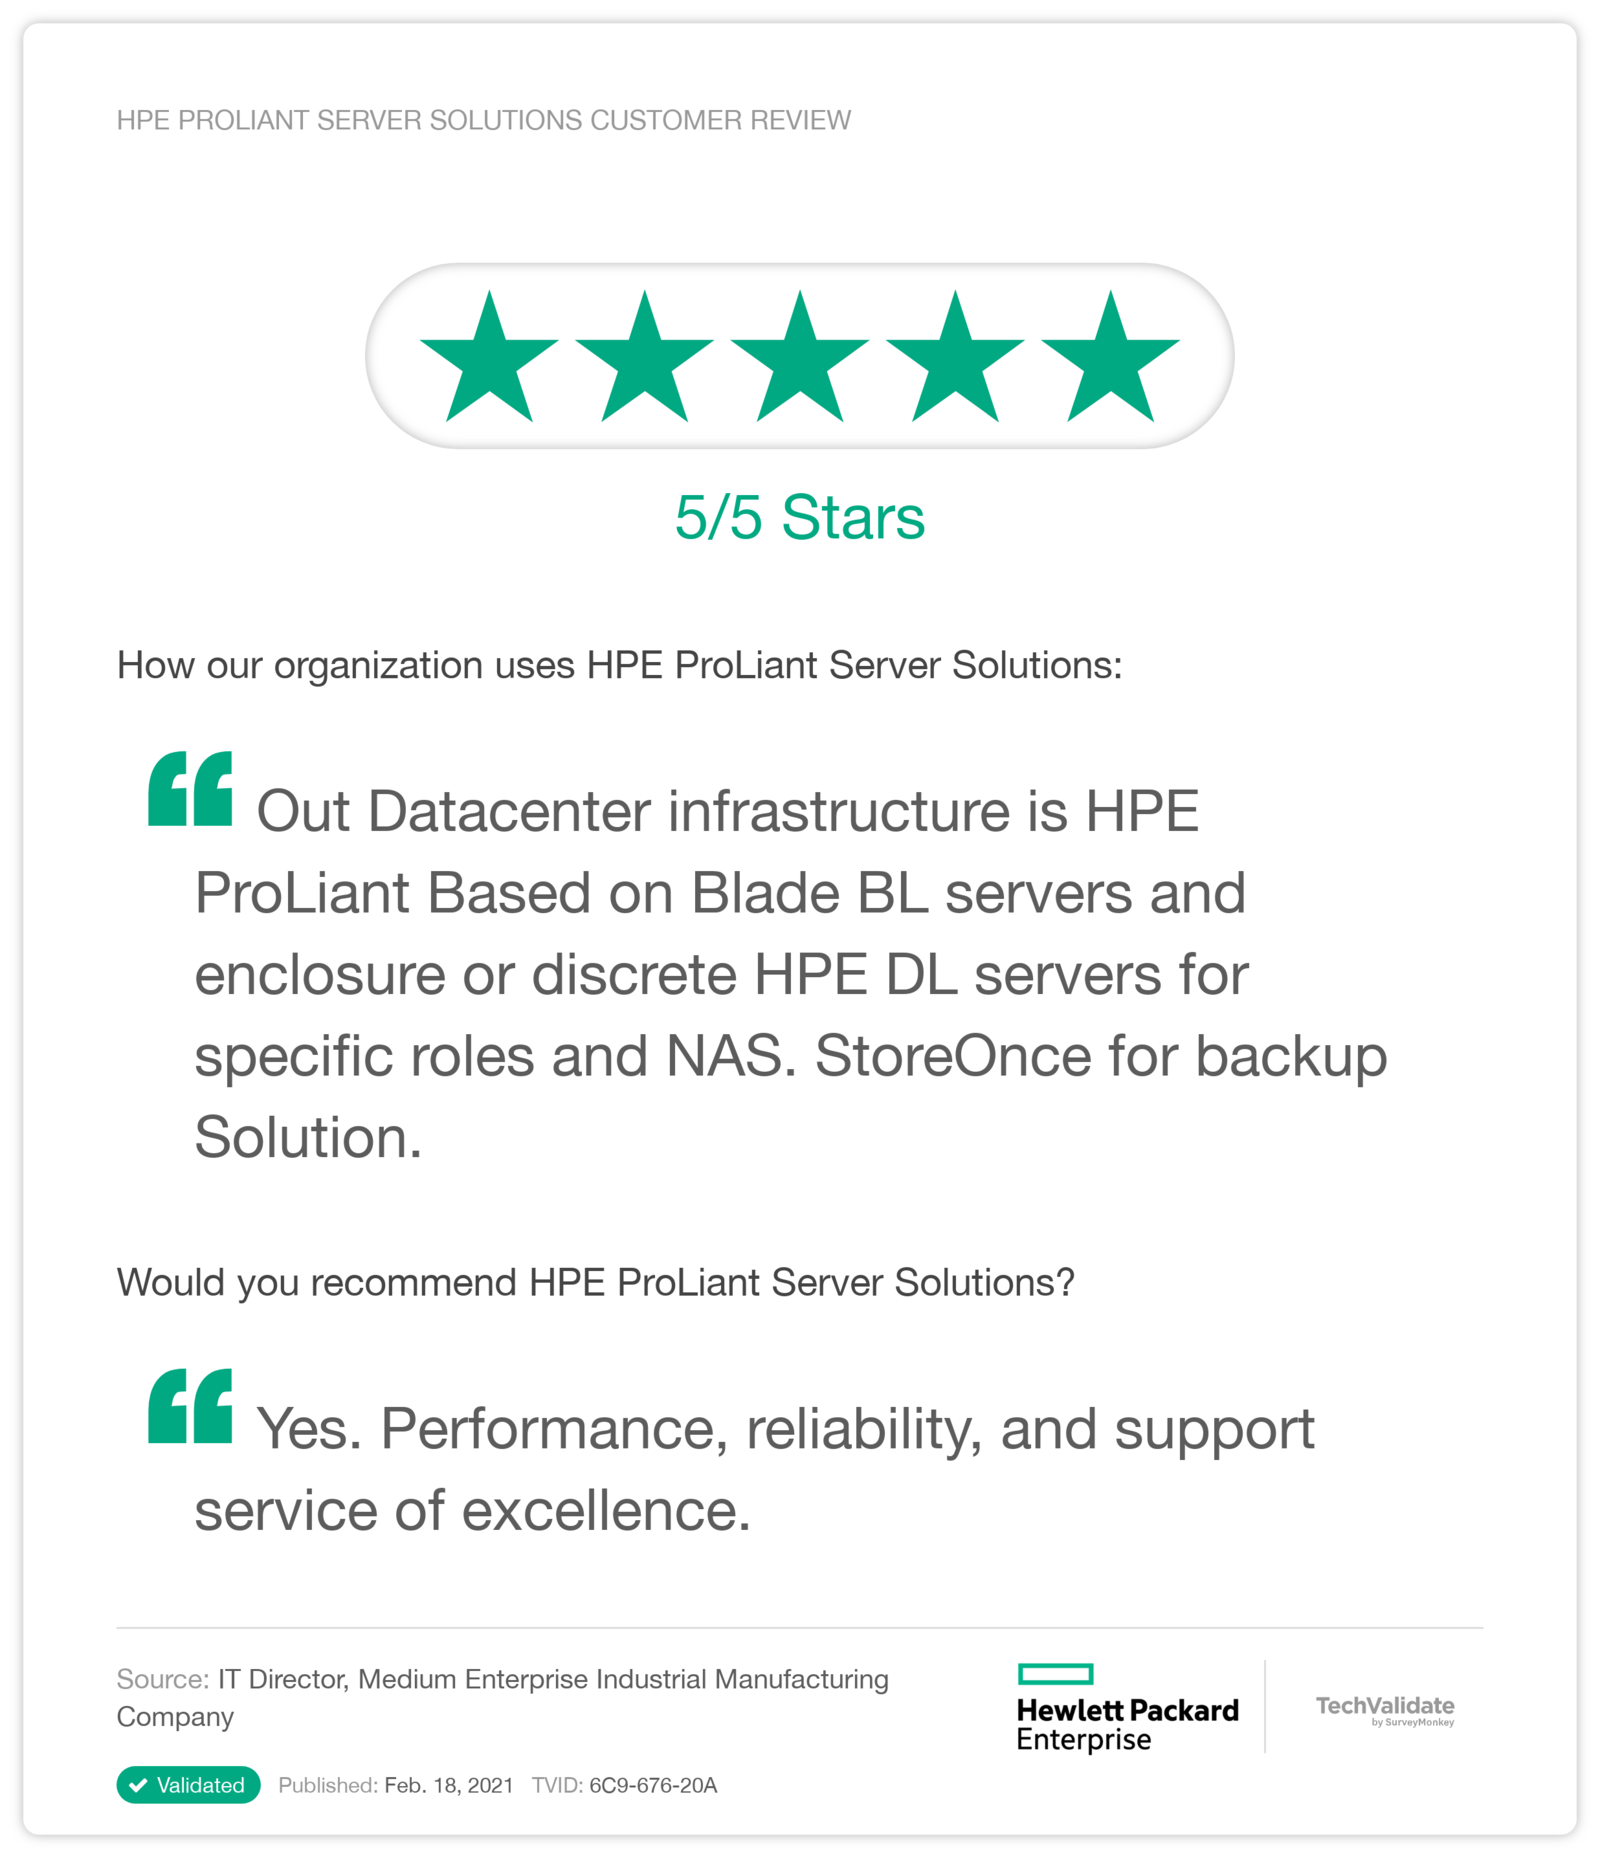 HPE ProLiant Server solutions Customer Review